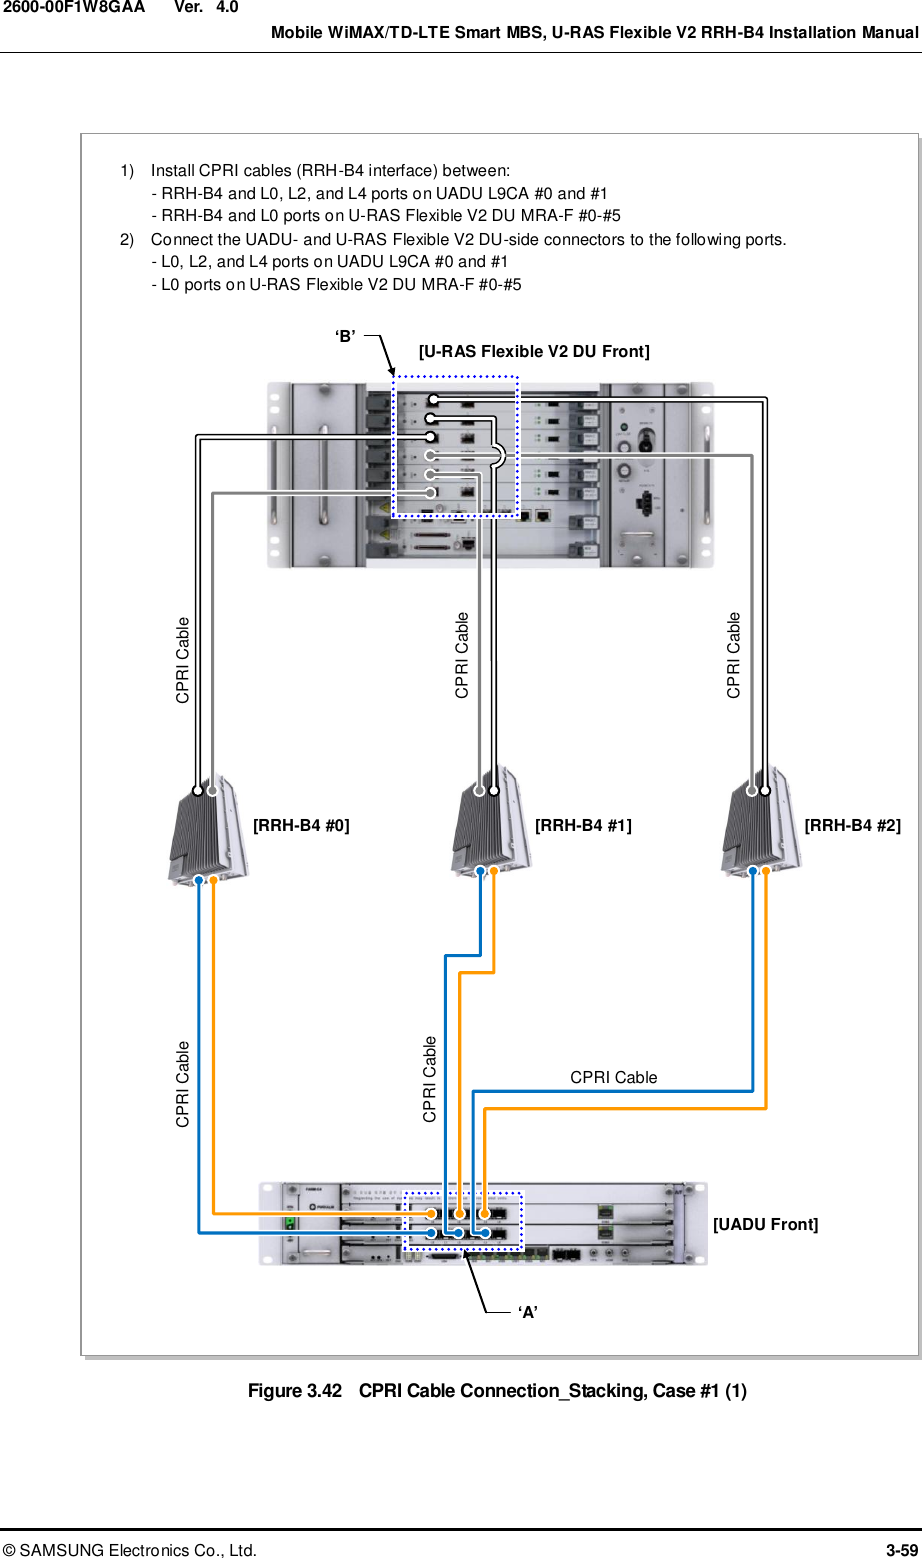  Ver.    Mobile WiMAX/TD-LTE Smart MBS, U-RAS Flexible V2 RRH-B4 Installation Manual ©  SAMSUNG Electronics Co., Ltd.  3-59 2600-00F1W8GAA 4.0  Figure 3.42  CPRI Cable Connection_Stacking, Case #1 (1) 1)    Install CPRI cables (RRH-B4 interface) between: - RRH-B4 and L0, L2, and L4 ports on UADU L9CA #0 and #1 - RRH-B4 and L0 ports on U-RAS Flexible V2 DU MRA-F #0-#5 2)    Connect the UADU- and U-RAS Flexible V2 DU-side connectors to the following ports. - L0, L2, and L4 ports on UADU L9CA #0 and #1 - L0 ports on U-RAS Flexible V2 DU MRA-F #0-#5 CPRI Cable [RRH-B4 #0] [UADU Front] ‘A’ [RRH-B4 #1] [RRH-B4 #2] CPRI Cable CPRI Cable [U-RAS Flexible V2 DU Front] ‘B’ CPRI Cable CPRI Cable CPRI Cable 